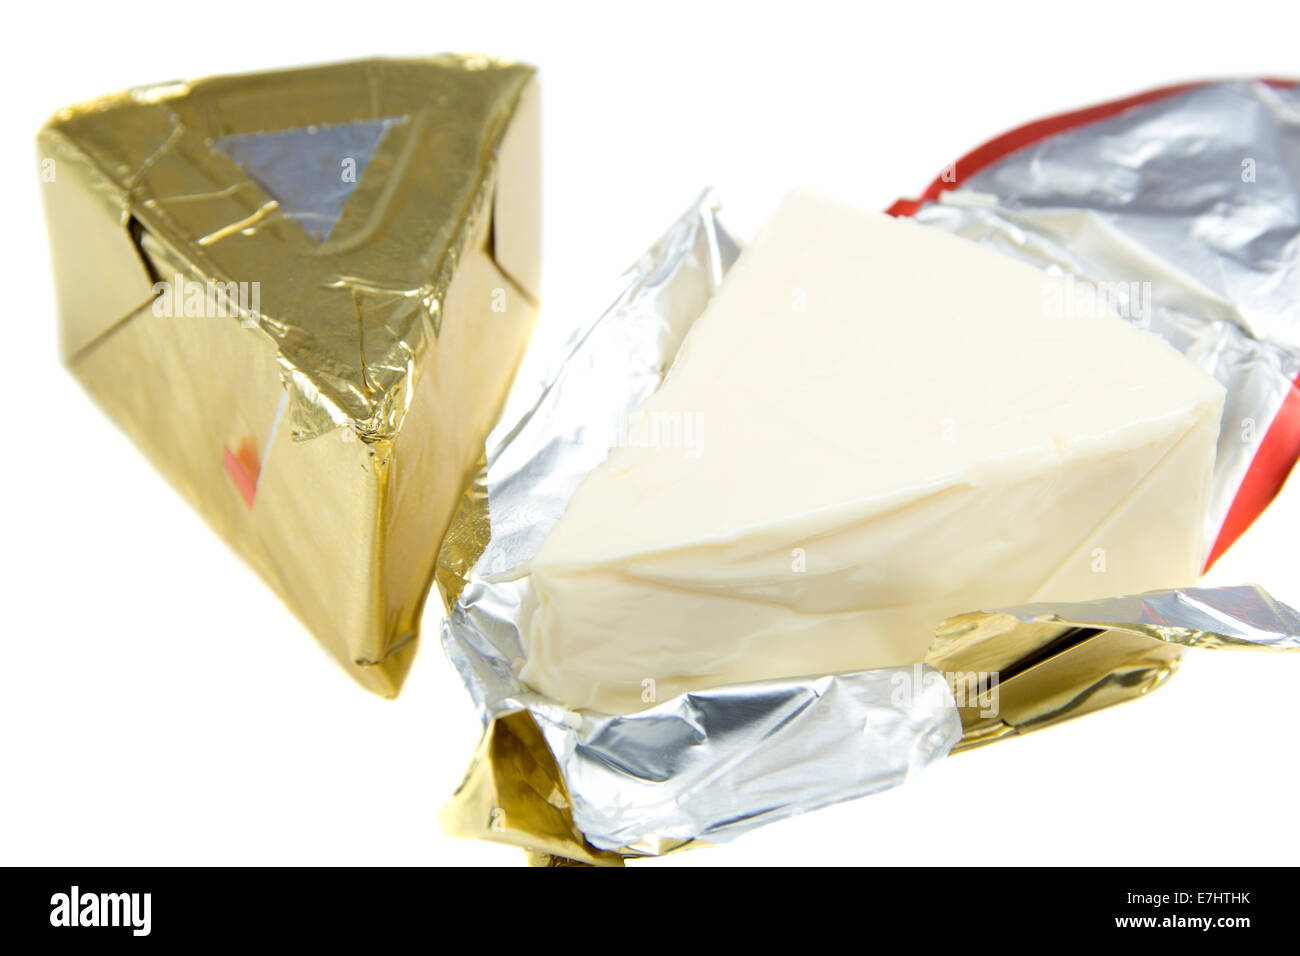 Triangle piece of cheese in golden foil on white background Stock Photo